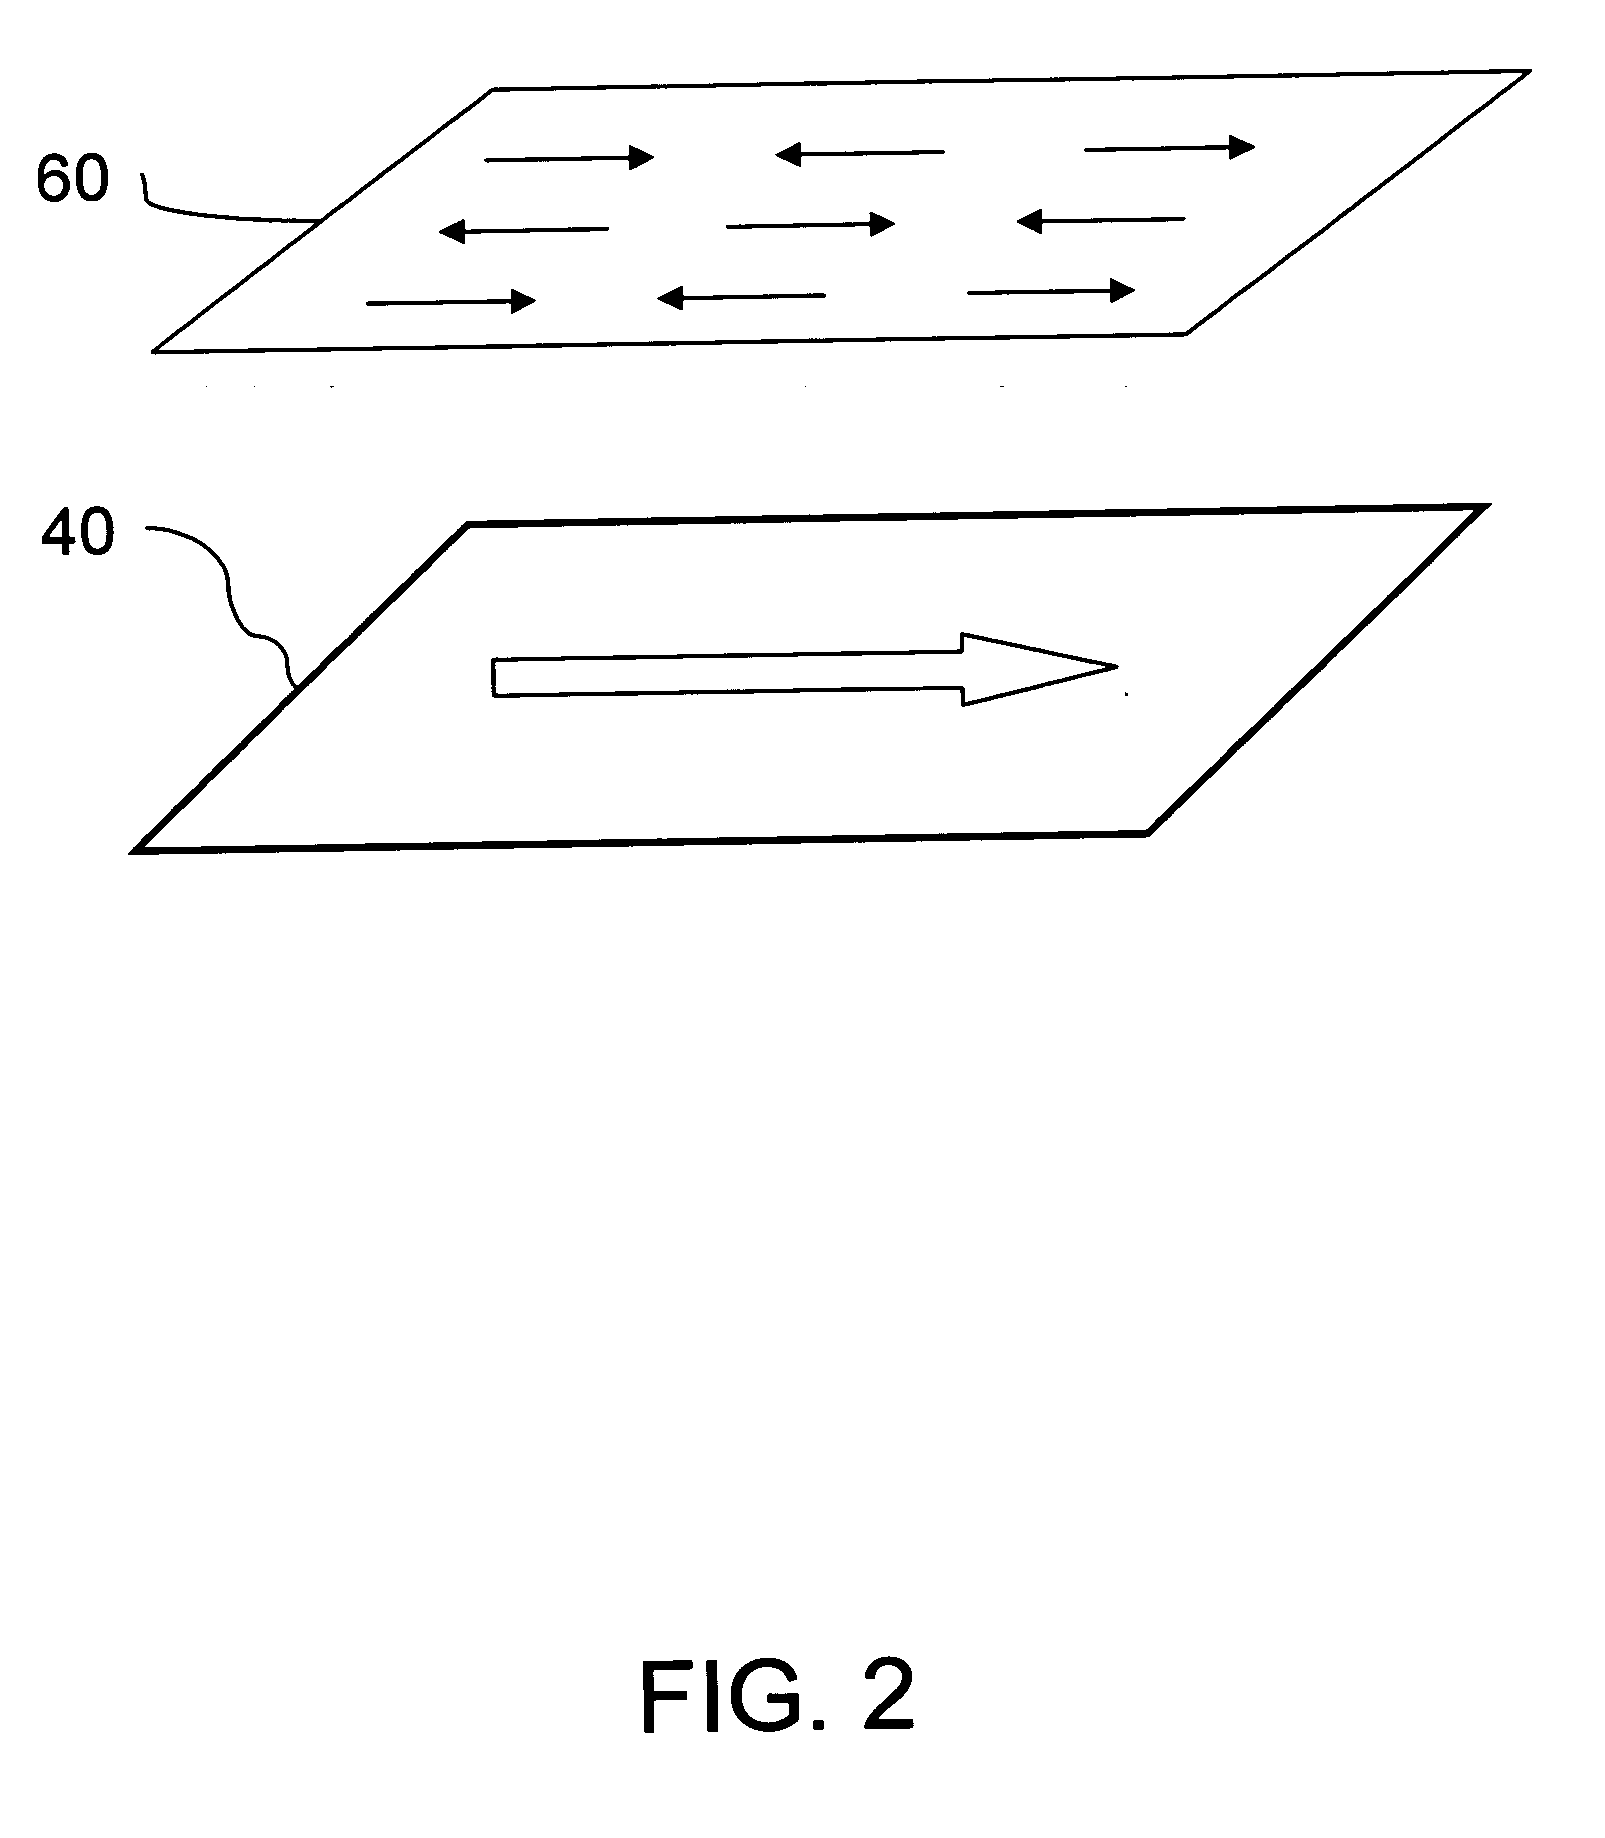 Magnetic random access memory with lower switching field through indirect exchange coupling